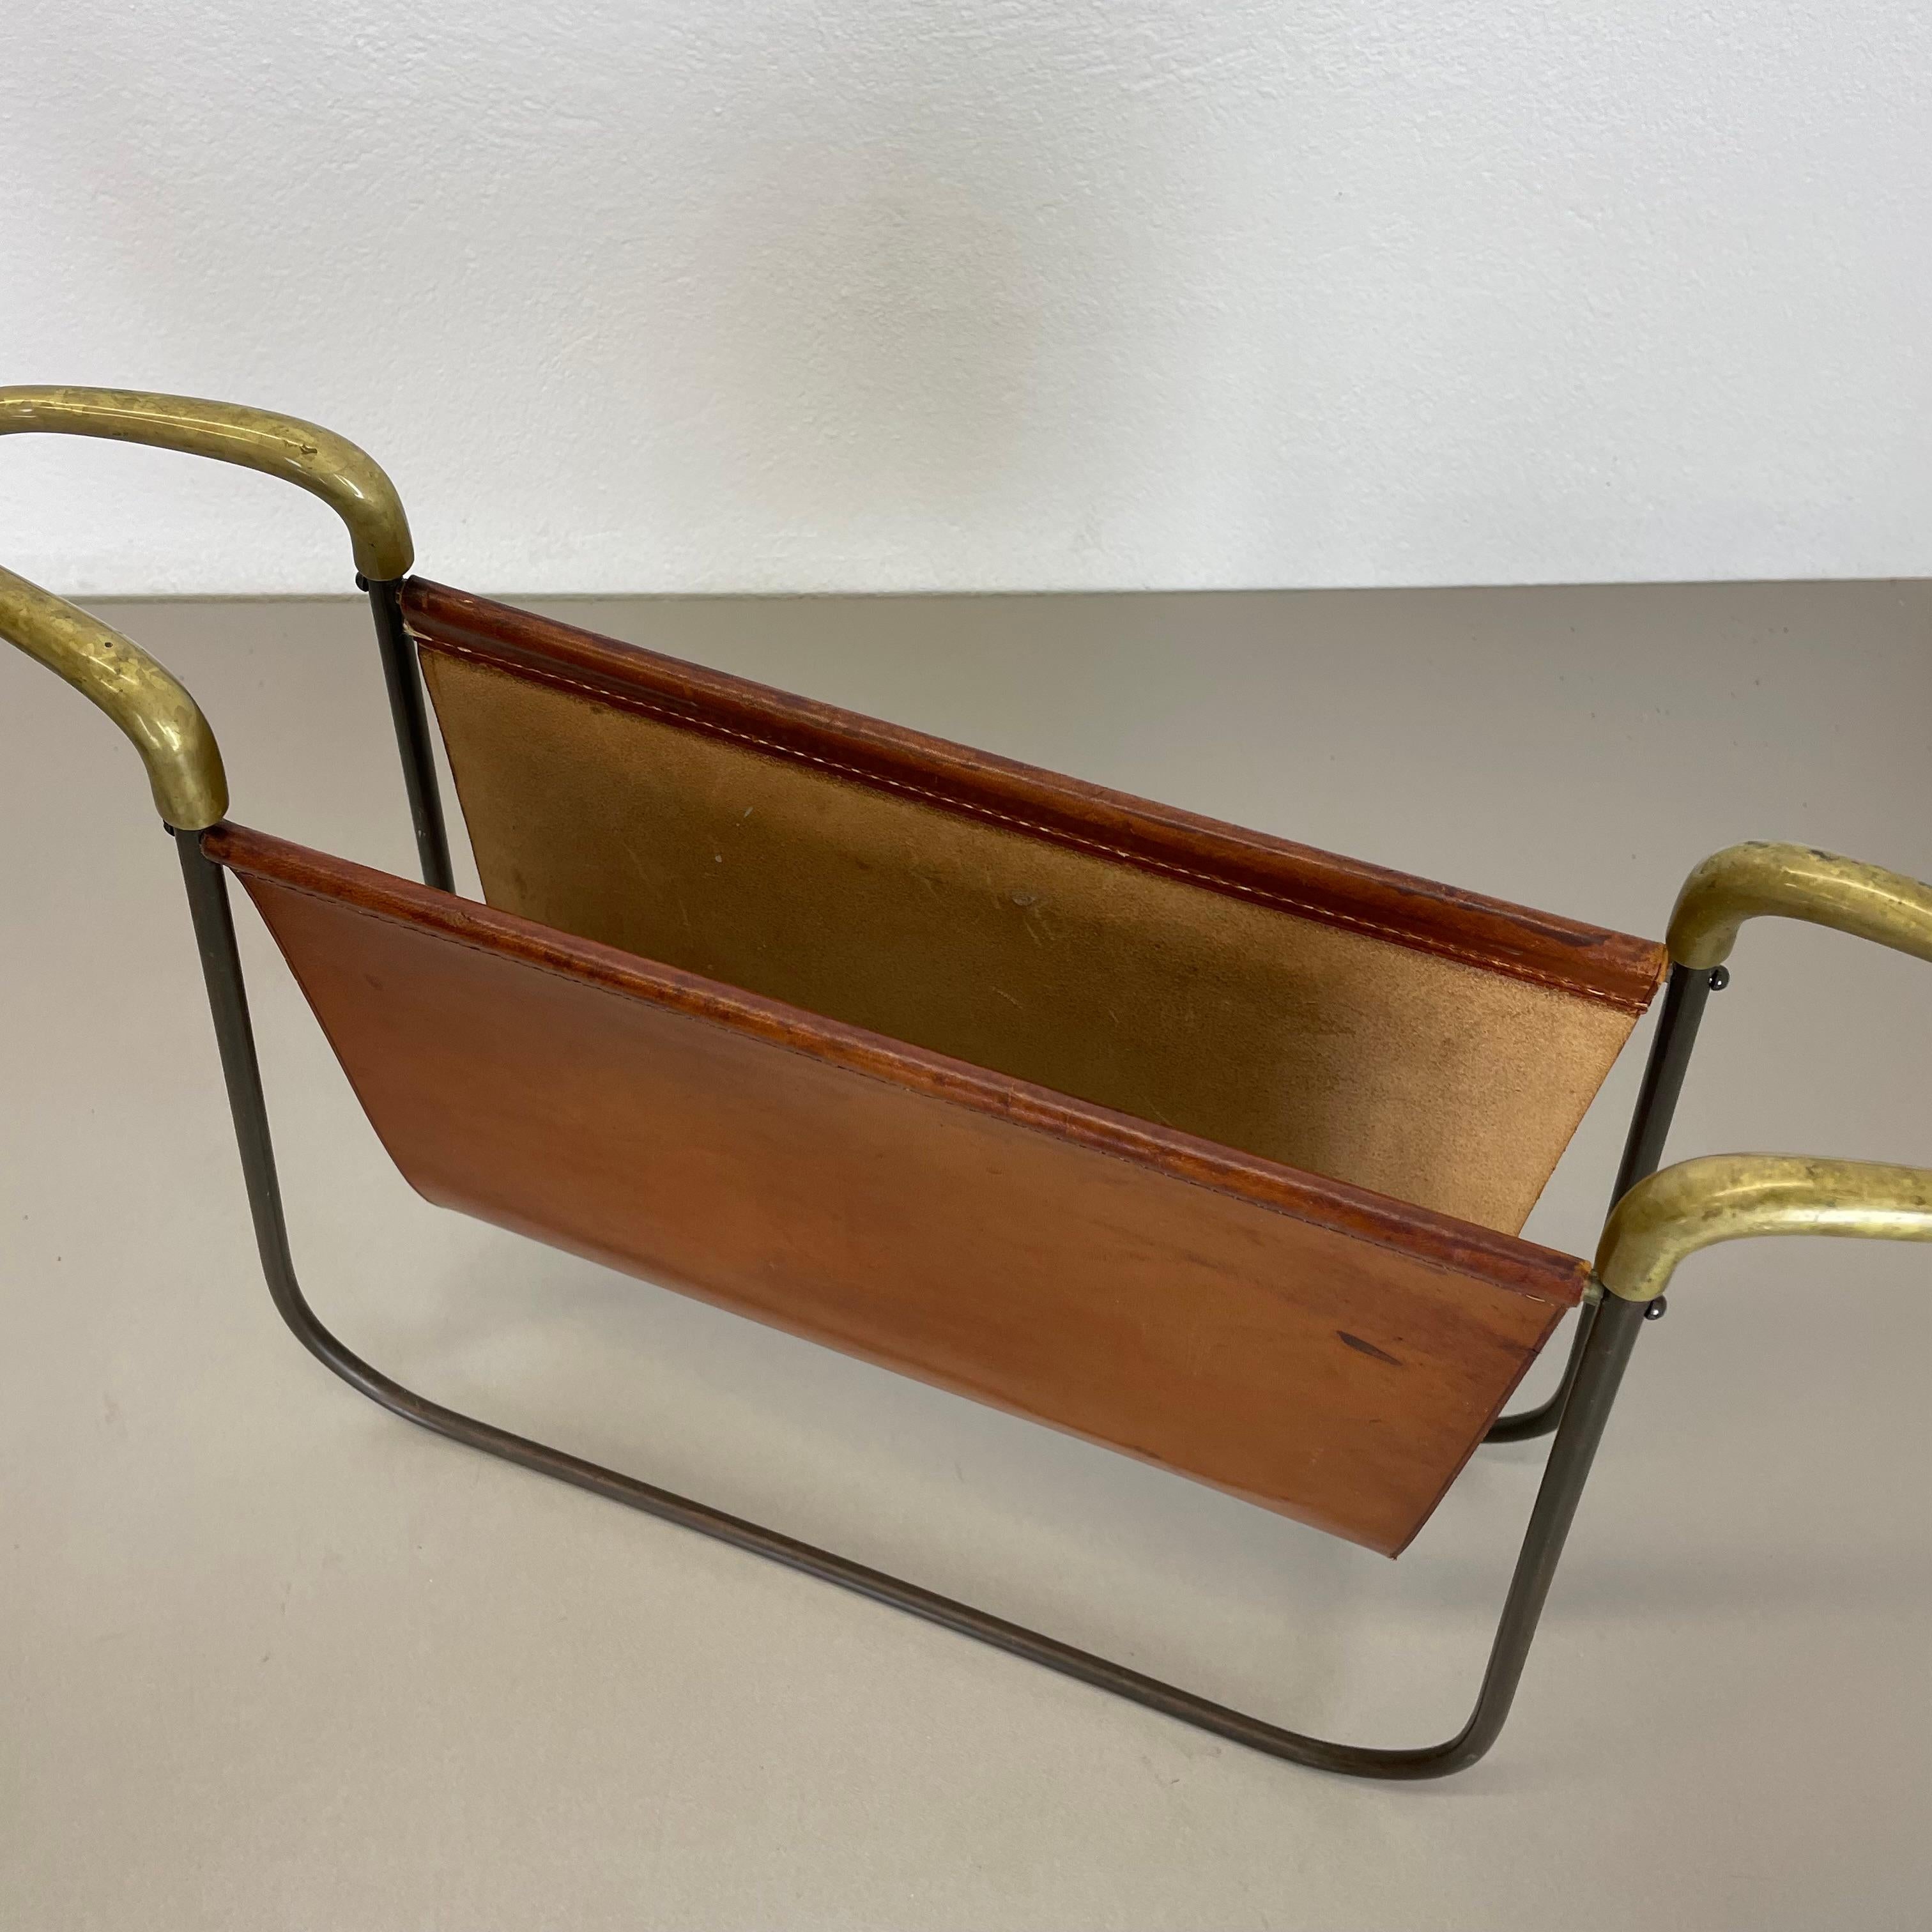 rare Brass and Brown Leather Magazine Holder Model by Carl Auböck, Austria 1950s For Sale 3